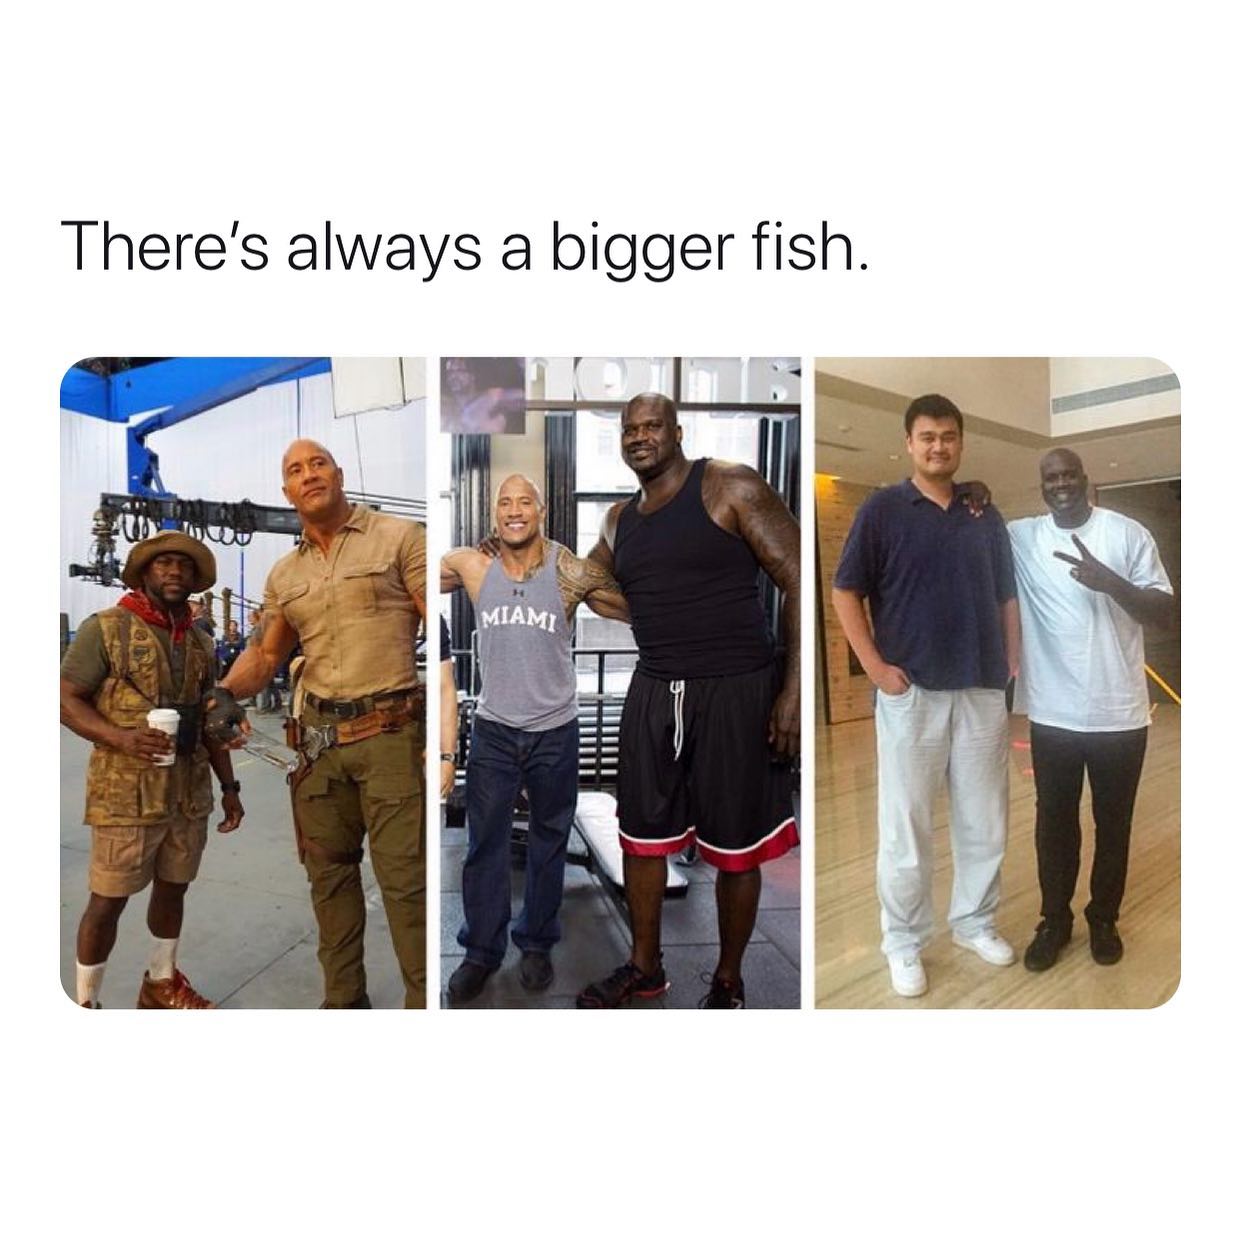 There is always bigger fish